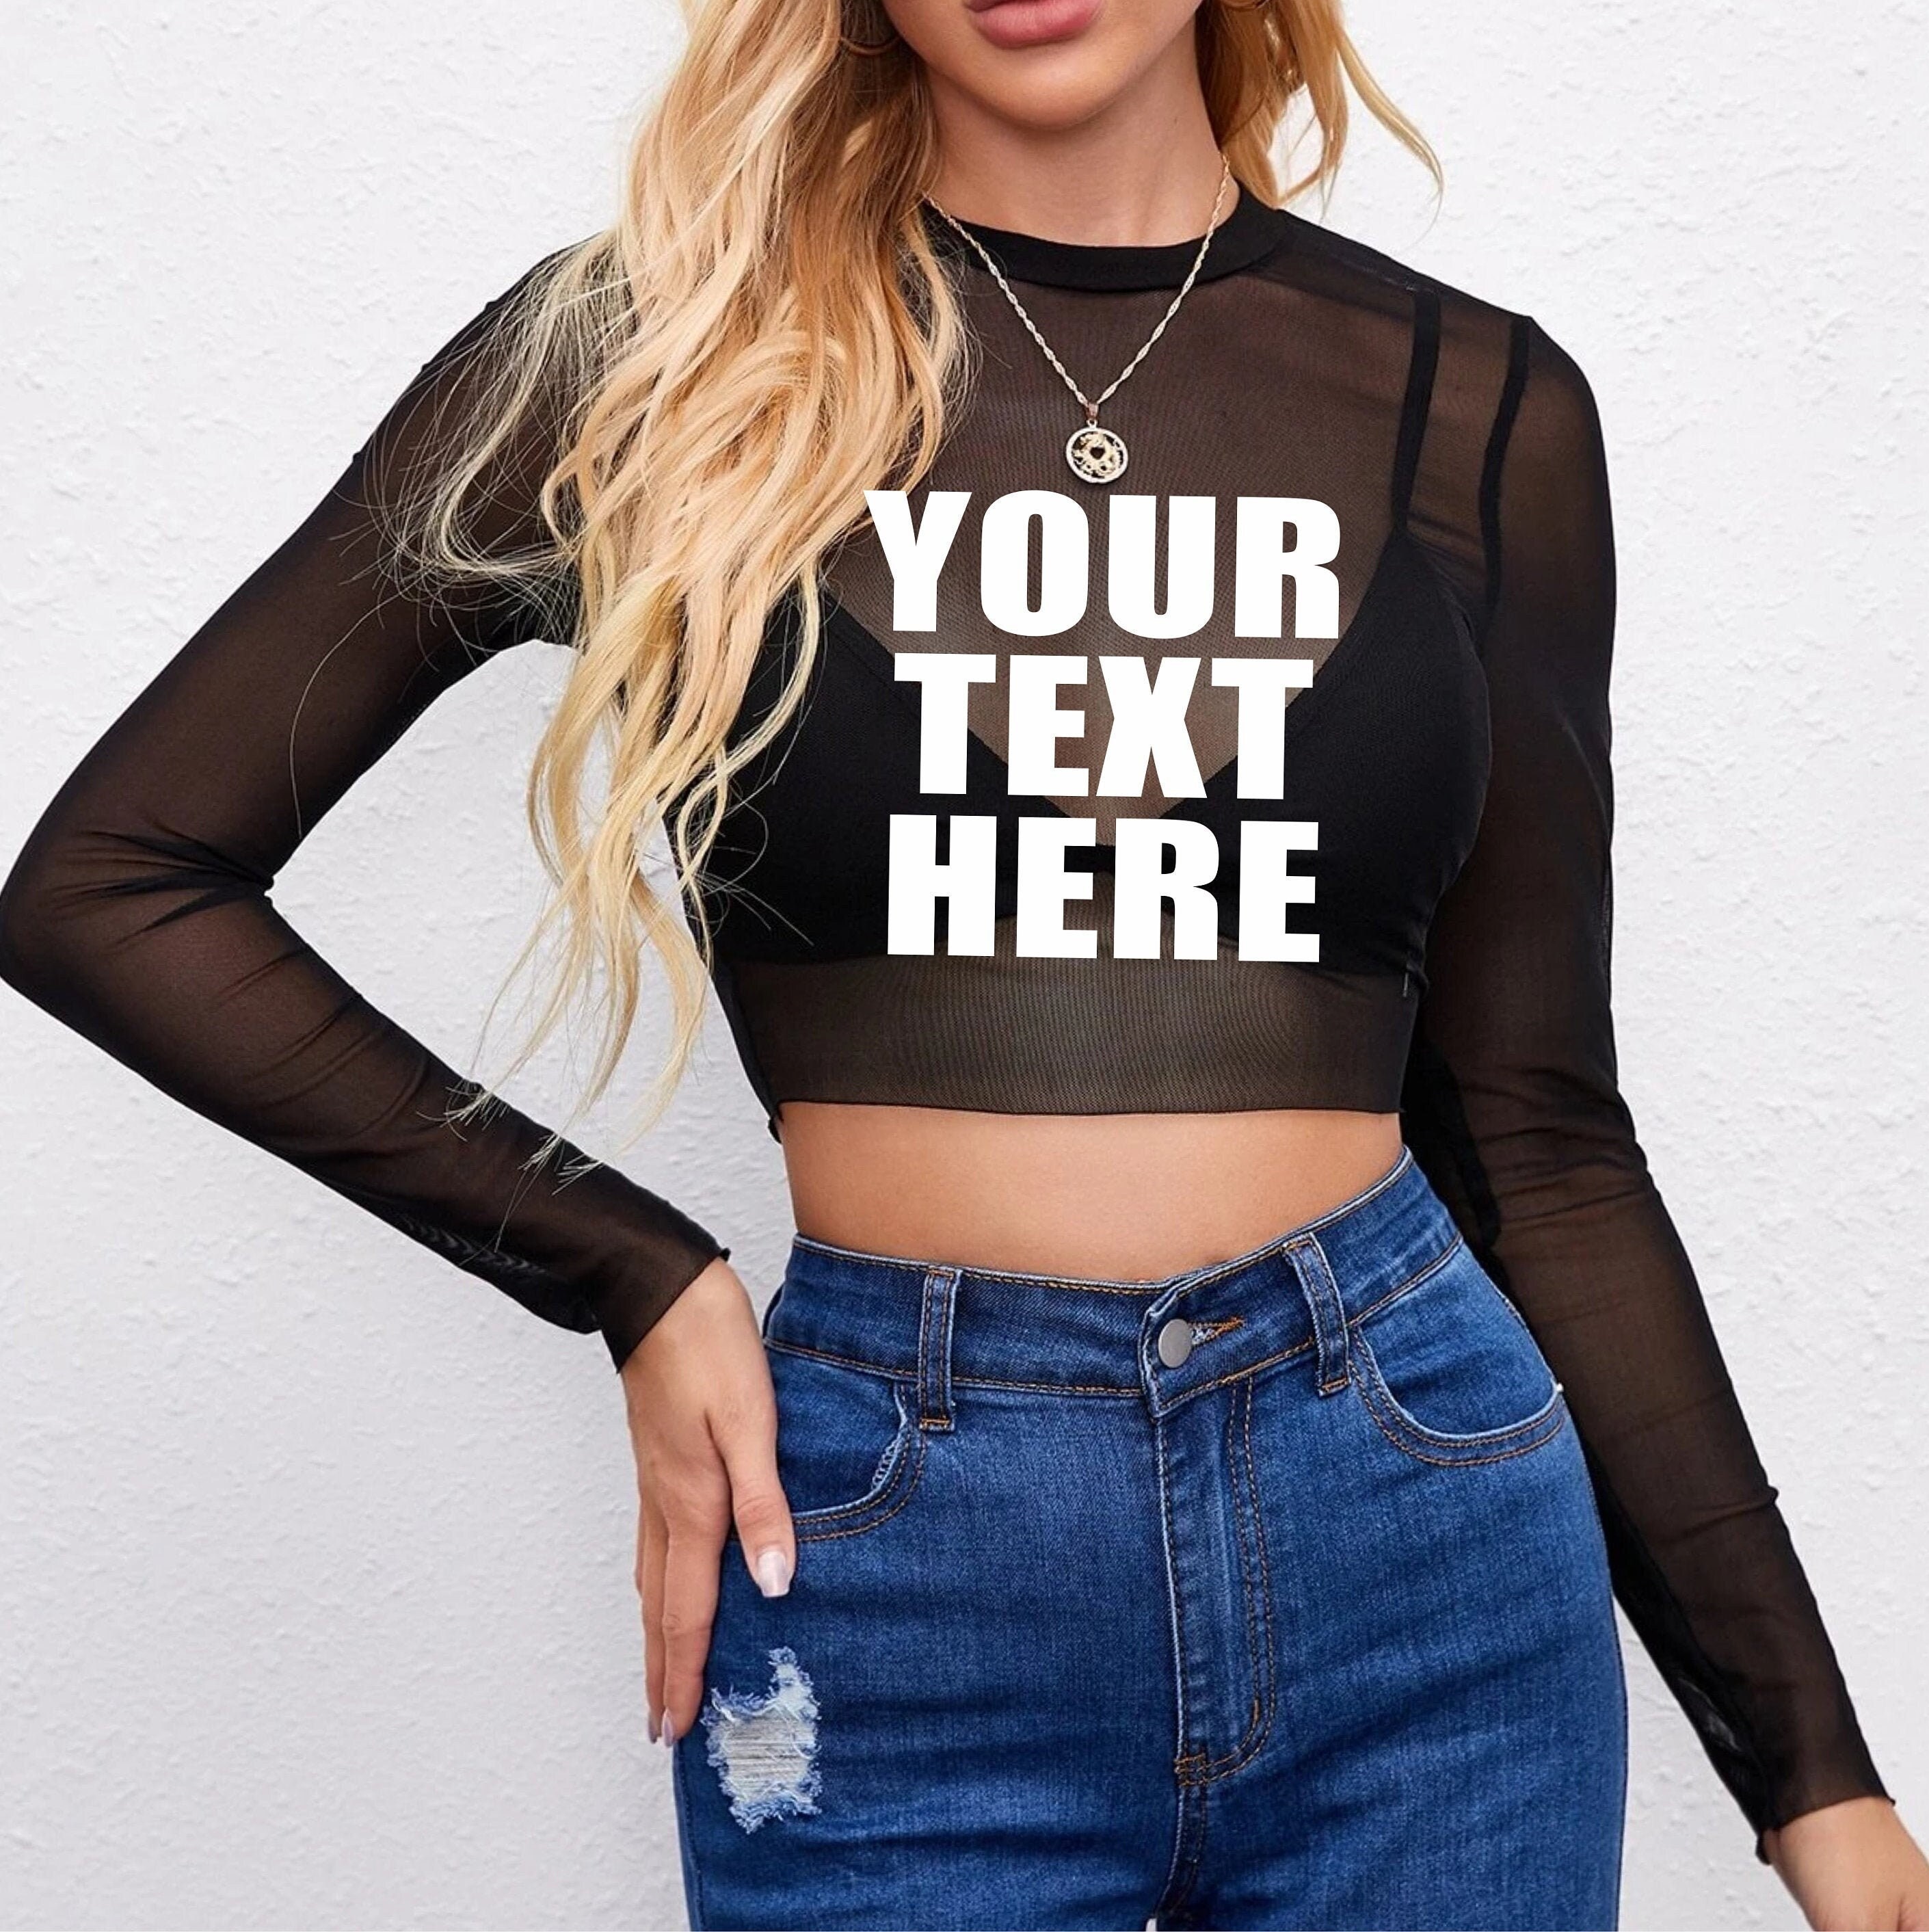 Licupiee Women Floral Lace Tube Tops Y2k Vintage Fashion Strapless Sheer  Mesh Crop Top Sexy Camisole Boho Bandeau Streetwear 